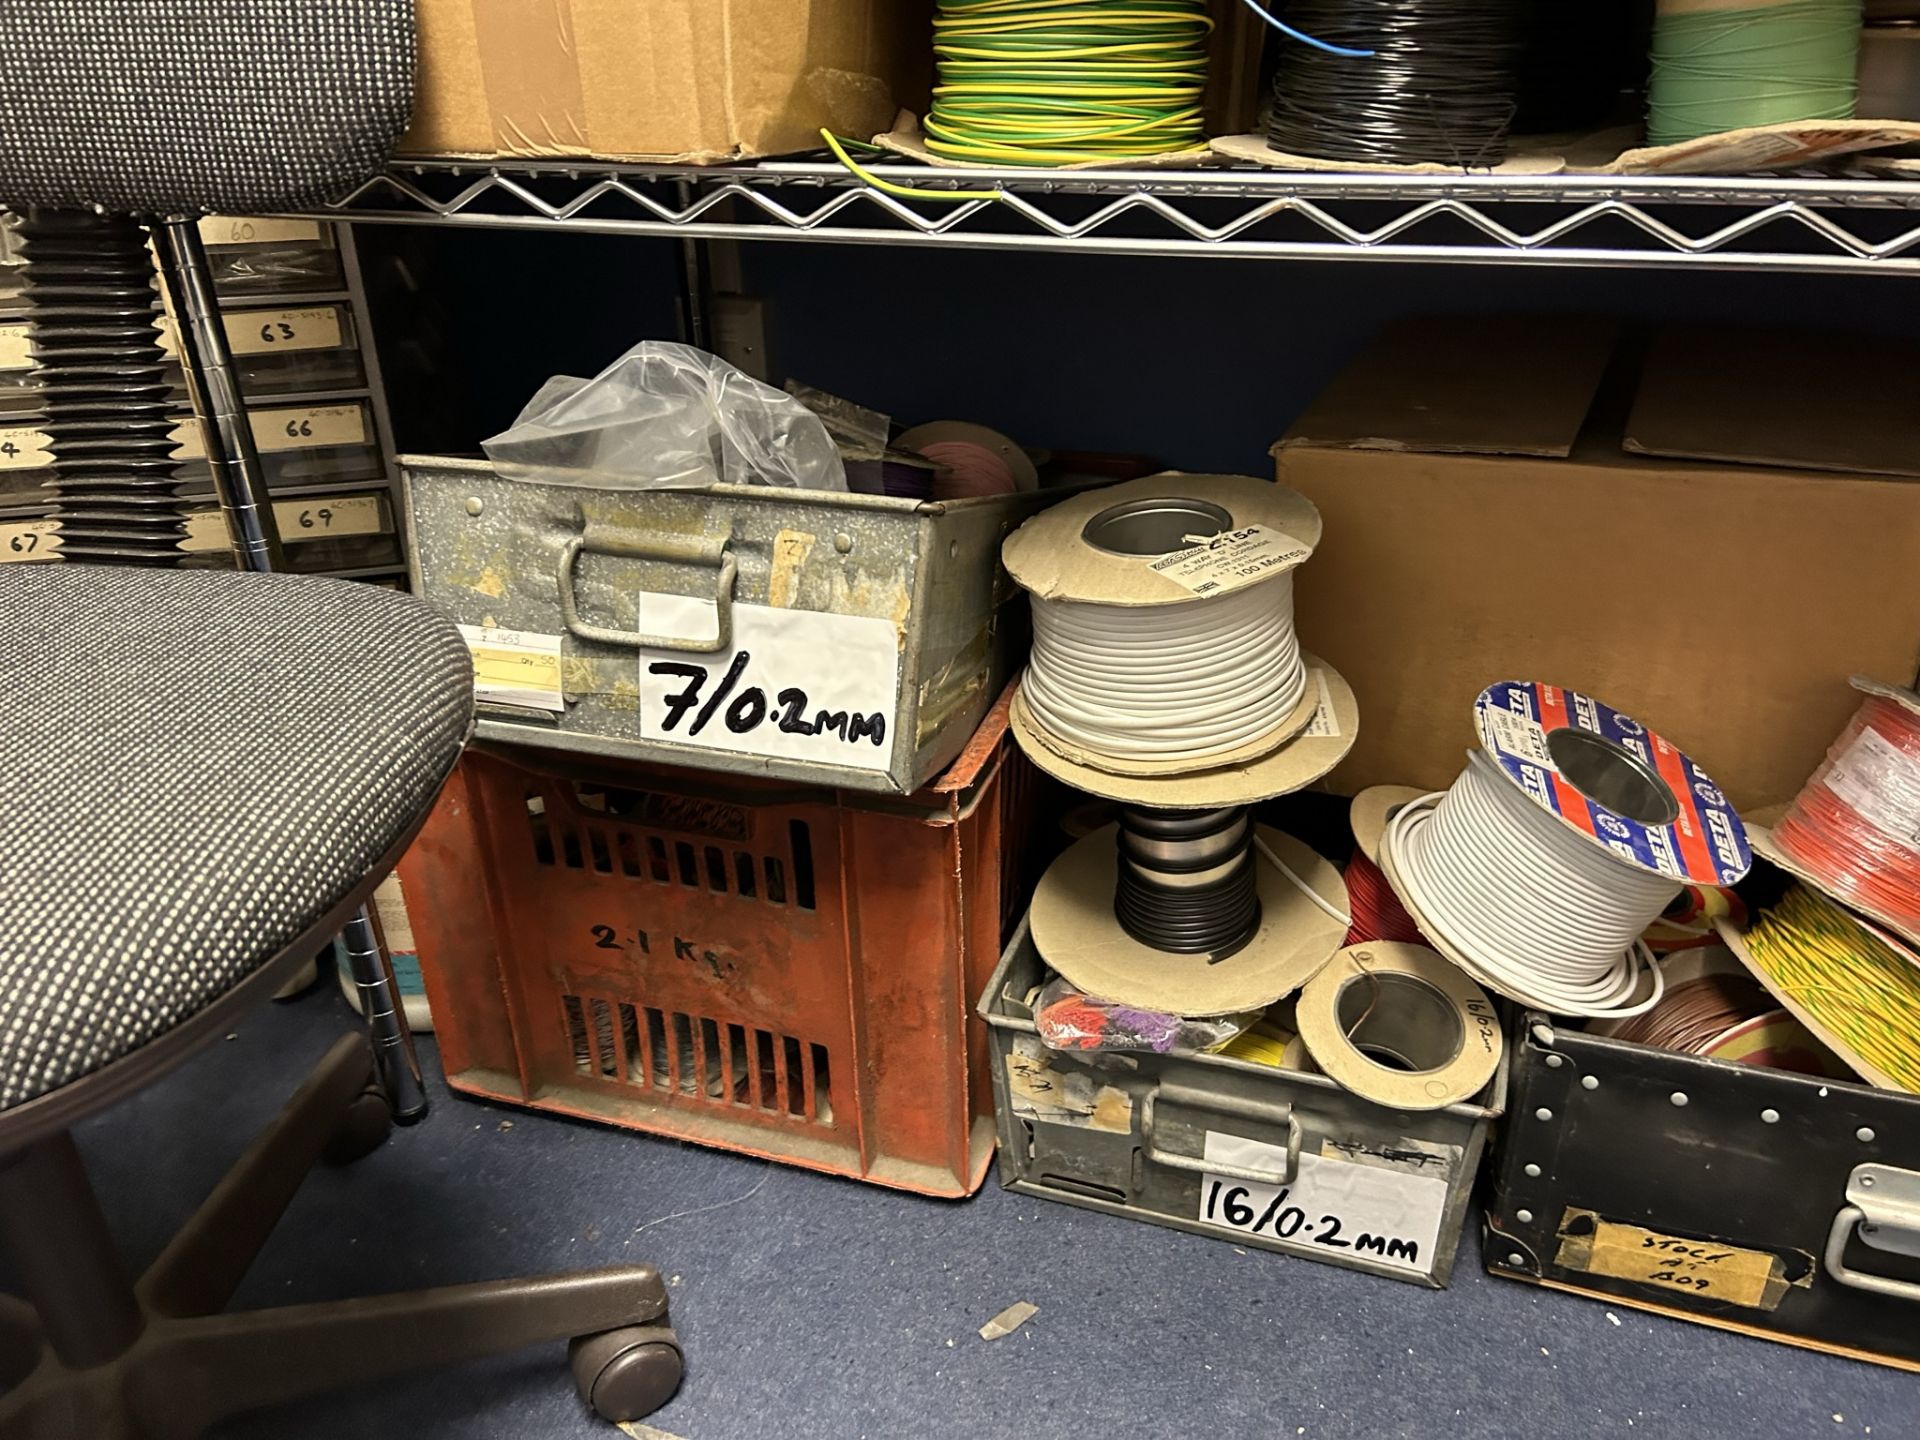 Contents of Spare Parts Room | Includes Computer/Circuit Parts, Washers etc - As Pictured - Image 6 of 19